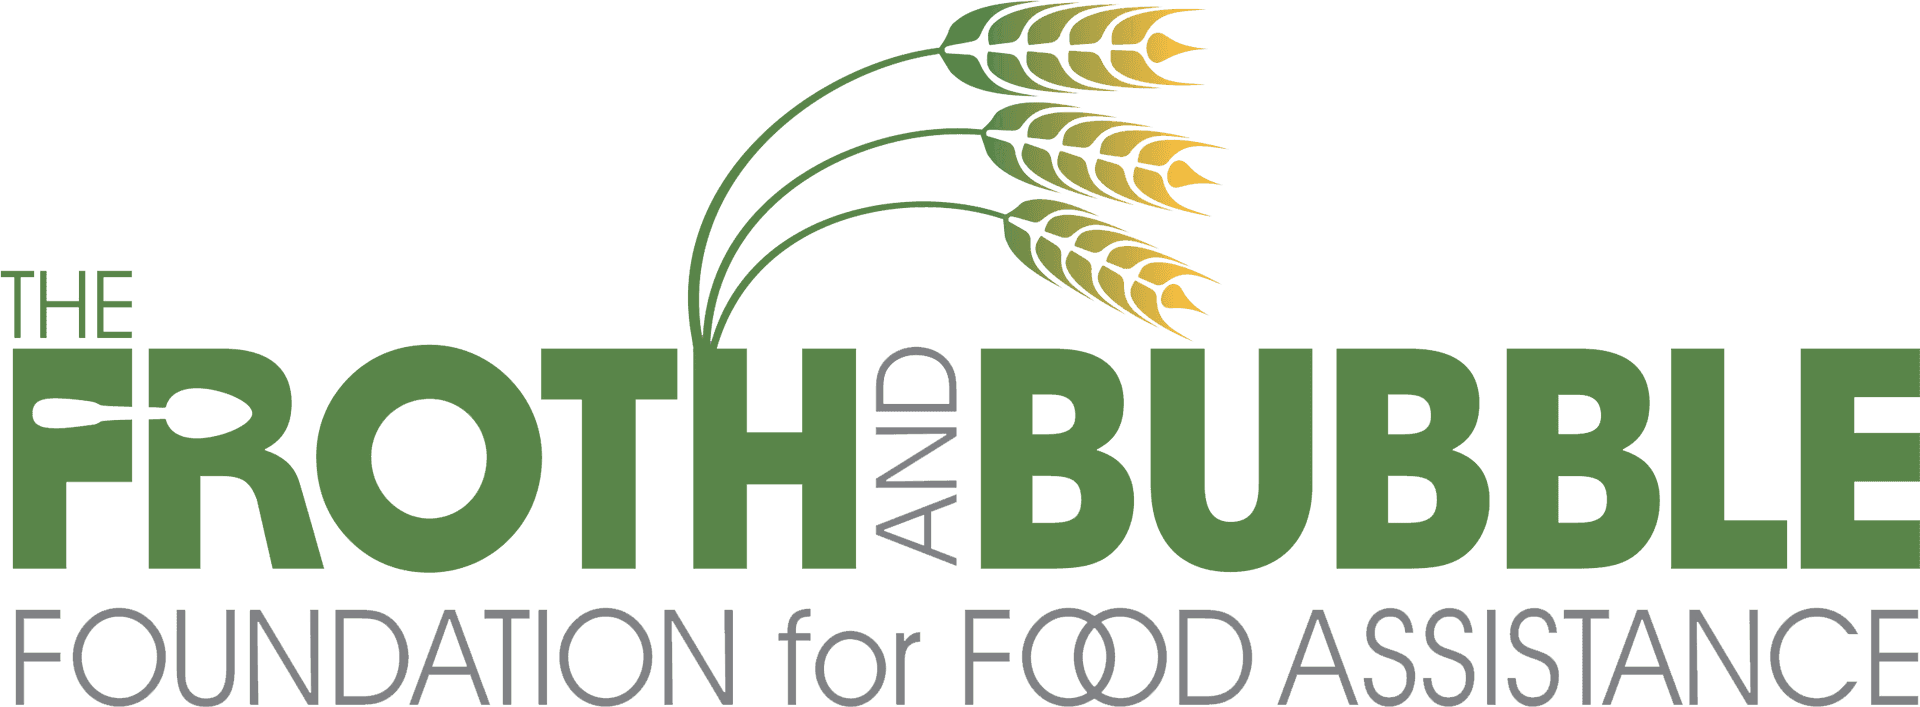 Froth And Bubble Food Assistance Foundation Logo PNG